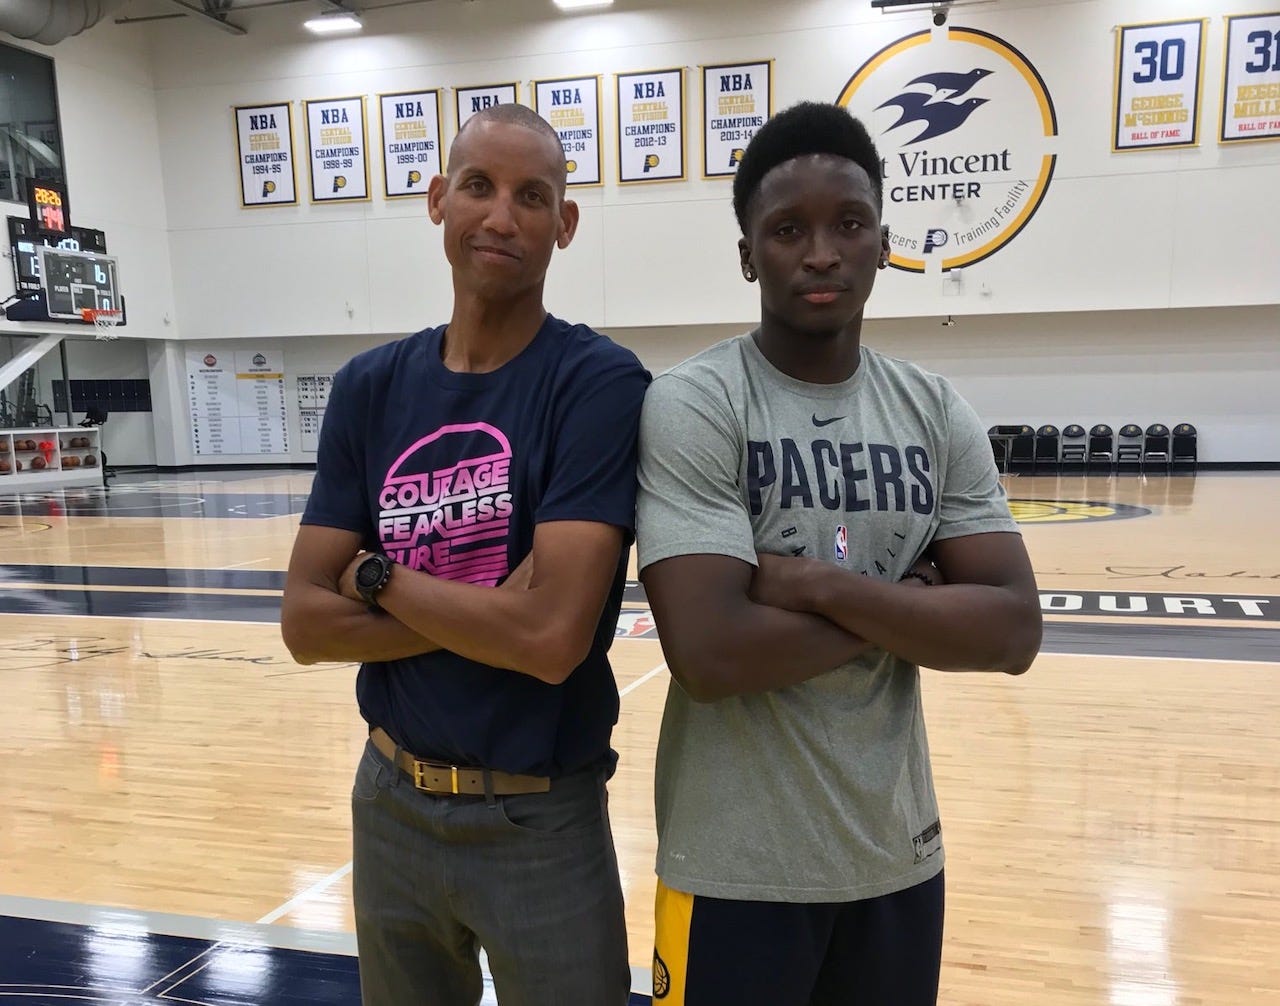 Former Indiana Pacer Reggie Miller (L), and other Pacer greats and